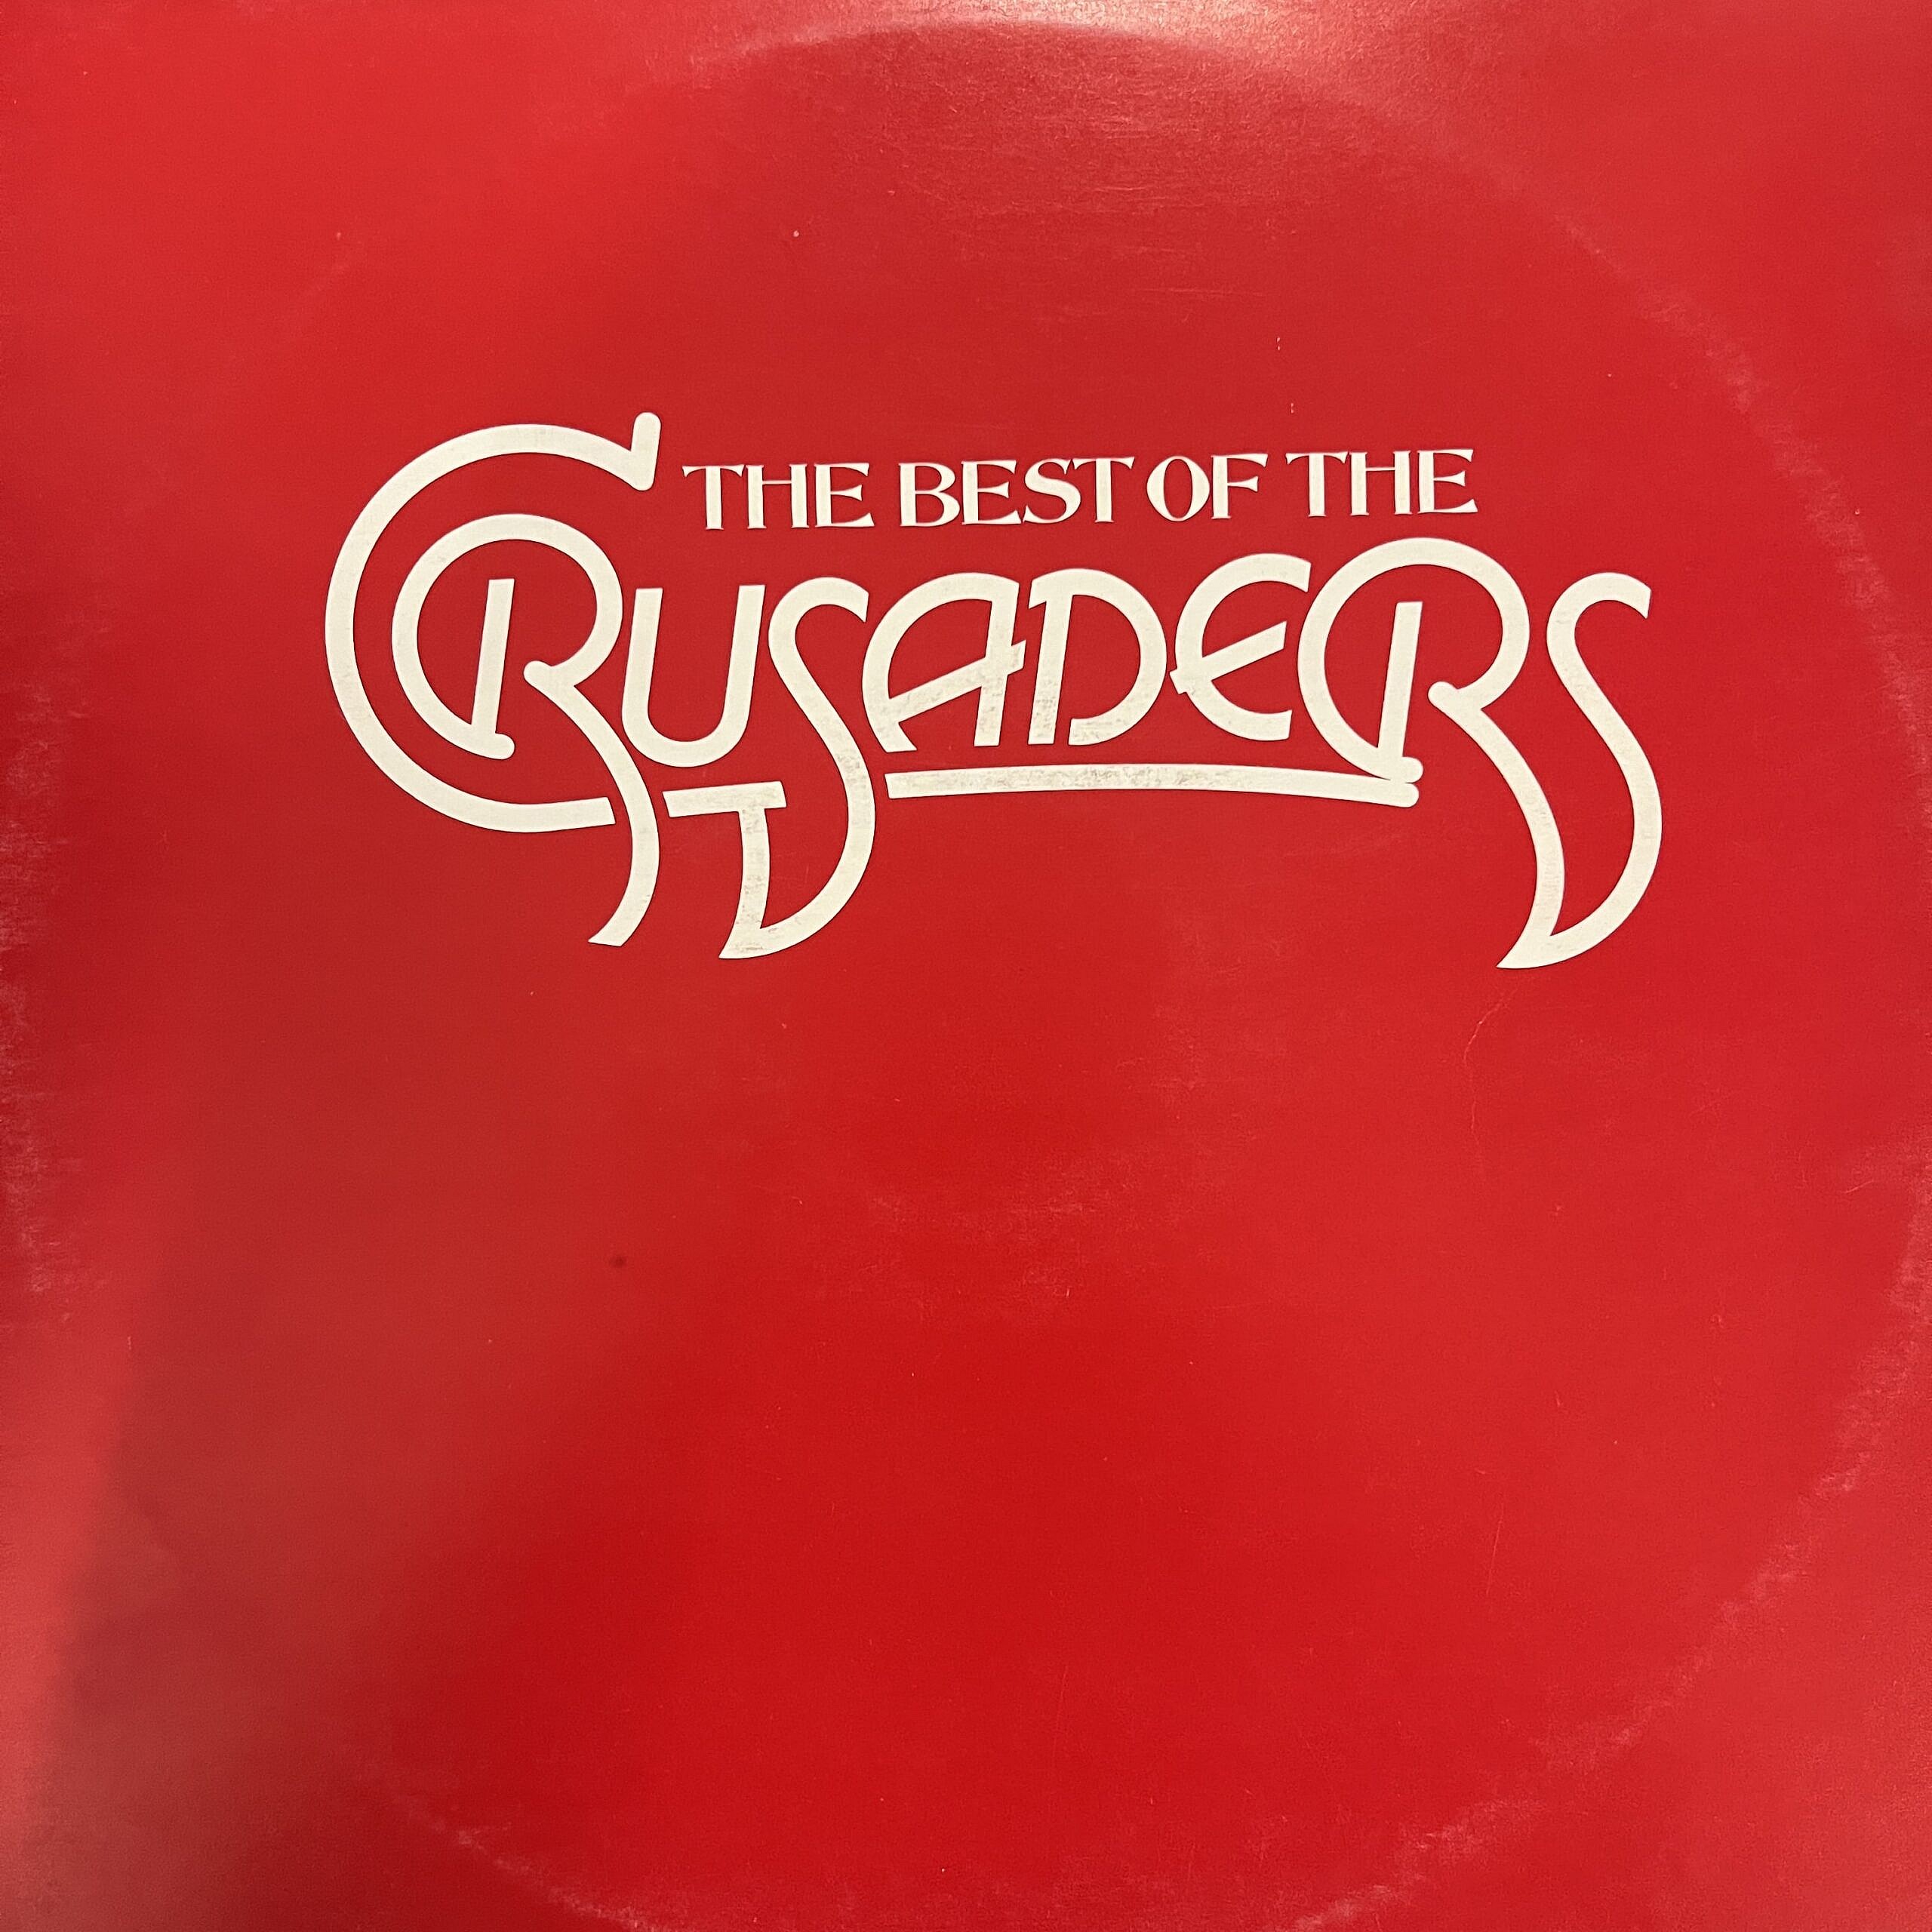 The Best Of The Crusaders